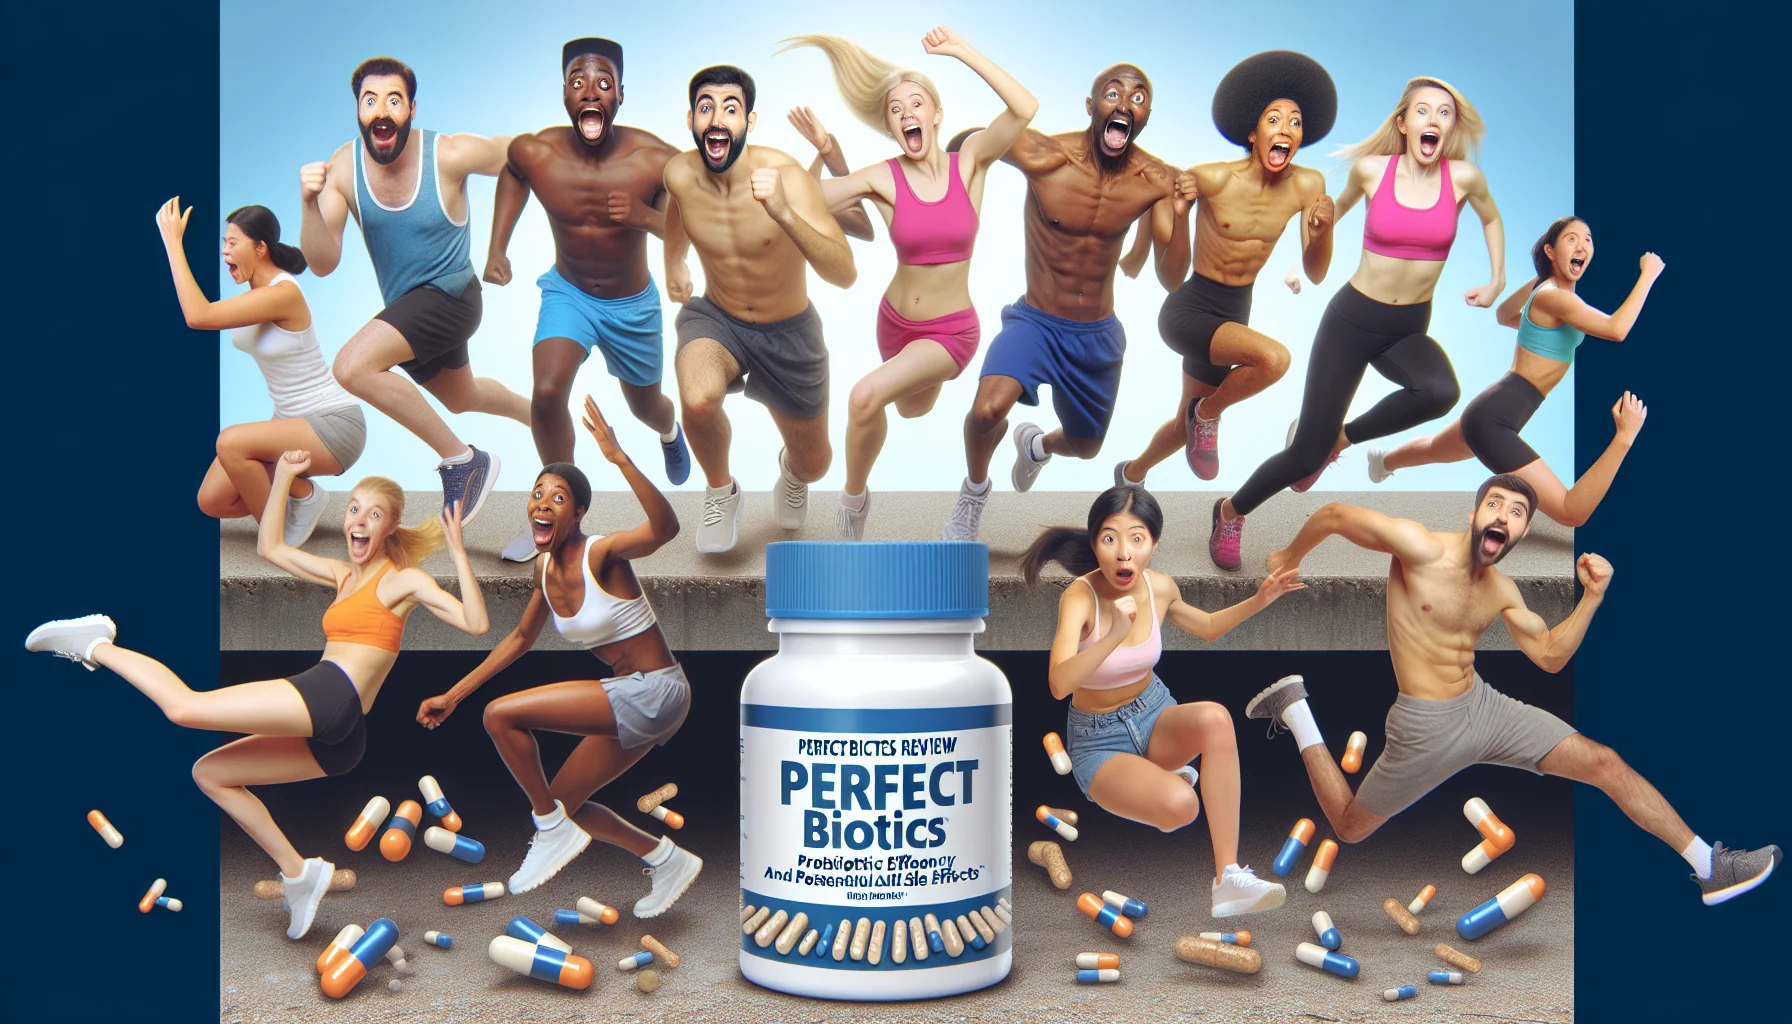 Generate an entertaining and realistic image that represents the effectiveness and possible side effects of Perfect Biotics. The image should convey a funny scenario in which diverse individuals of various descents, including Caucasian, Hispanic, Middle-Eastern, South Asian, and Black, are excitedly engaged in different forms of exercise, such as running, weightlifting, and yoga. There should be text on the image, in a friendly and bold font, that says 'Perfect Biotics Review: Probiotic Efficacy and Potential Side Effects'. The entire composition should be enticing and should promote an active lifestyle, with a tasteful balance of humor and information.